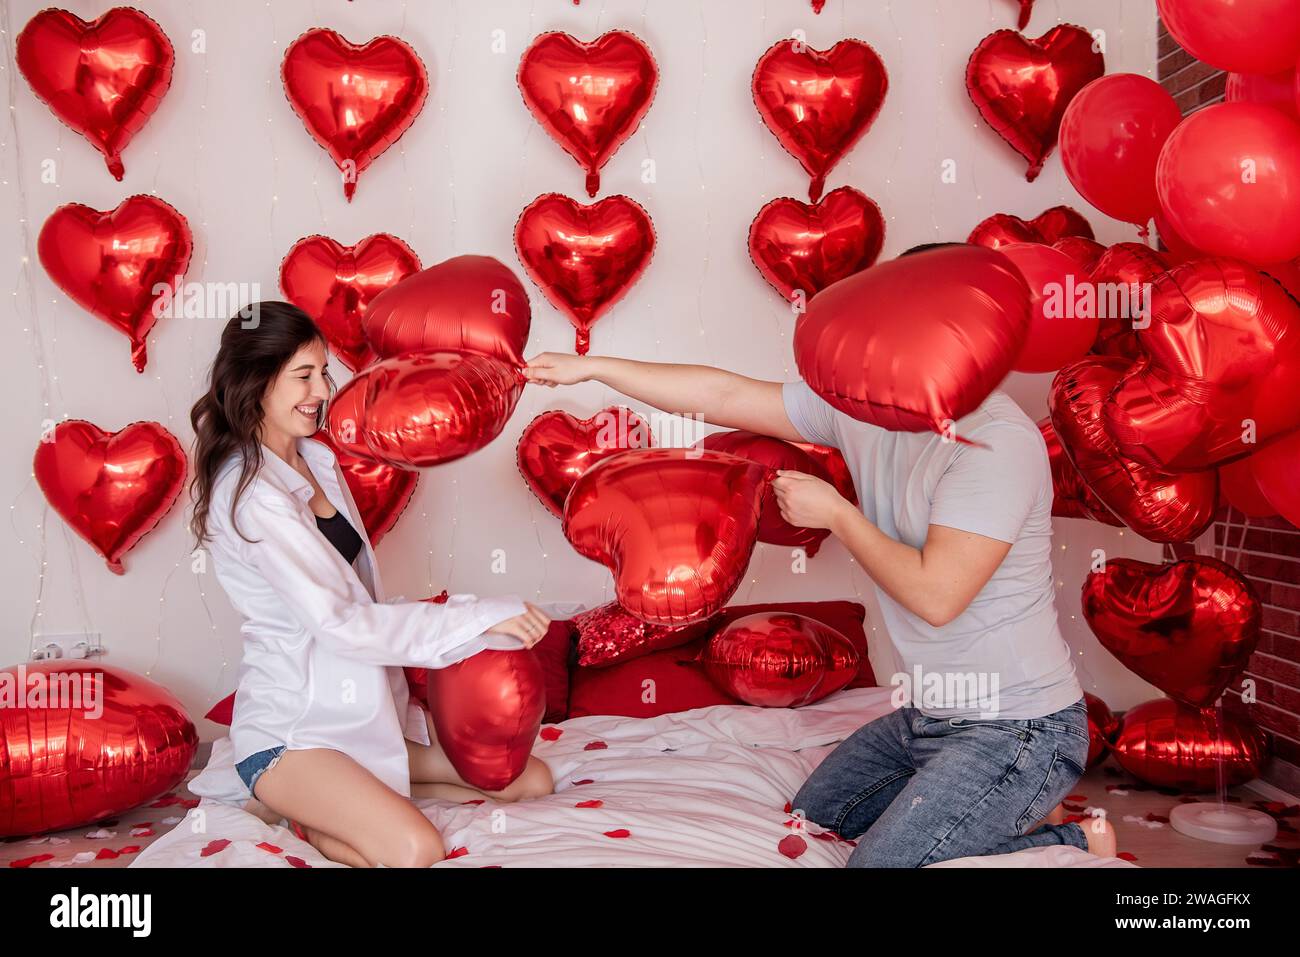 Playful moment between couple engaging in pillow balloons fight on bed, with heart shaped red balloons in background. Woman is joyfully fooling around Stock Photo